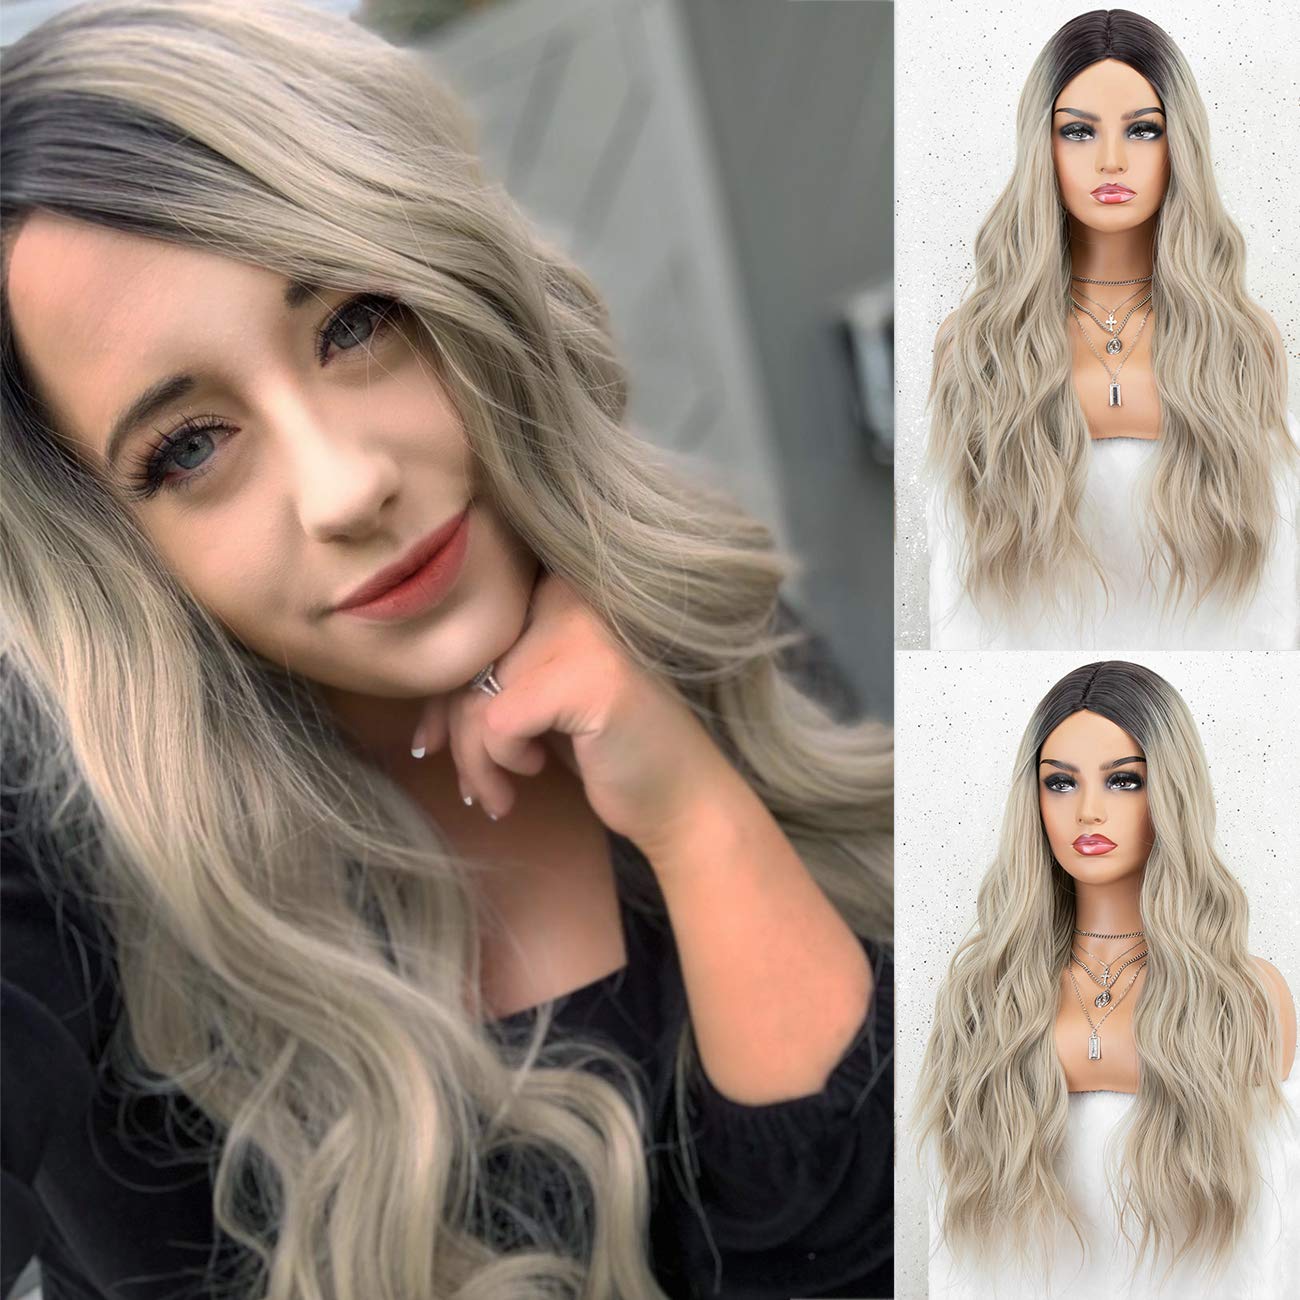 Price:$19.99     K'ryssma Ash Blonde Wig Dark Roots Ombre Synthetic Wigs for Women Long Wavy Ombre Blonde Wig with Middle Part 22 Inches   Beauty